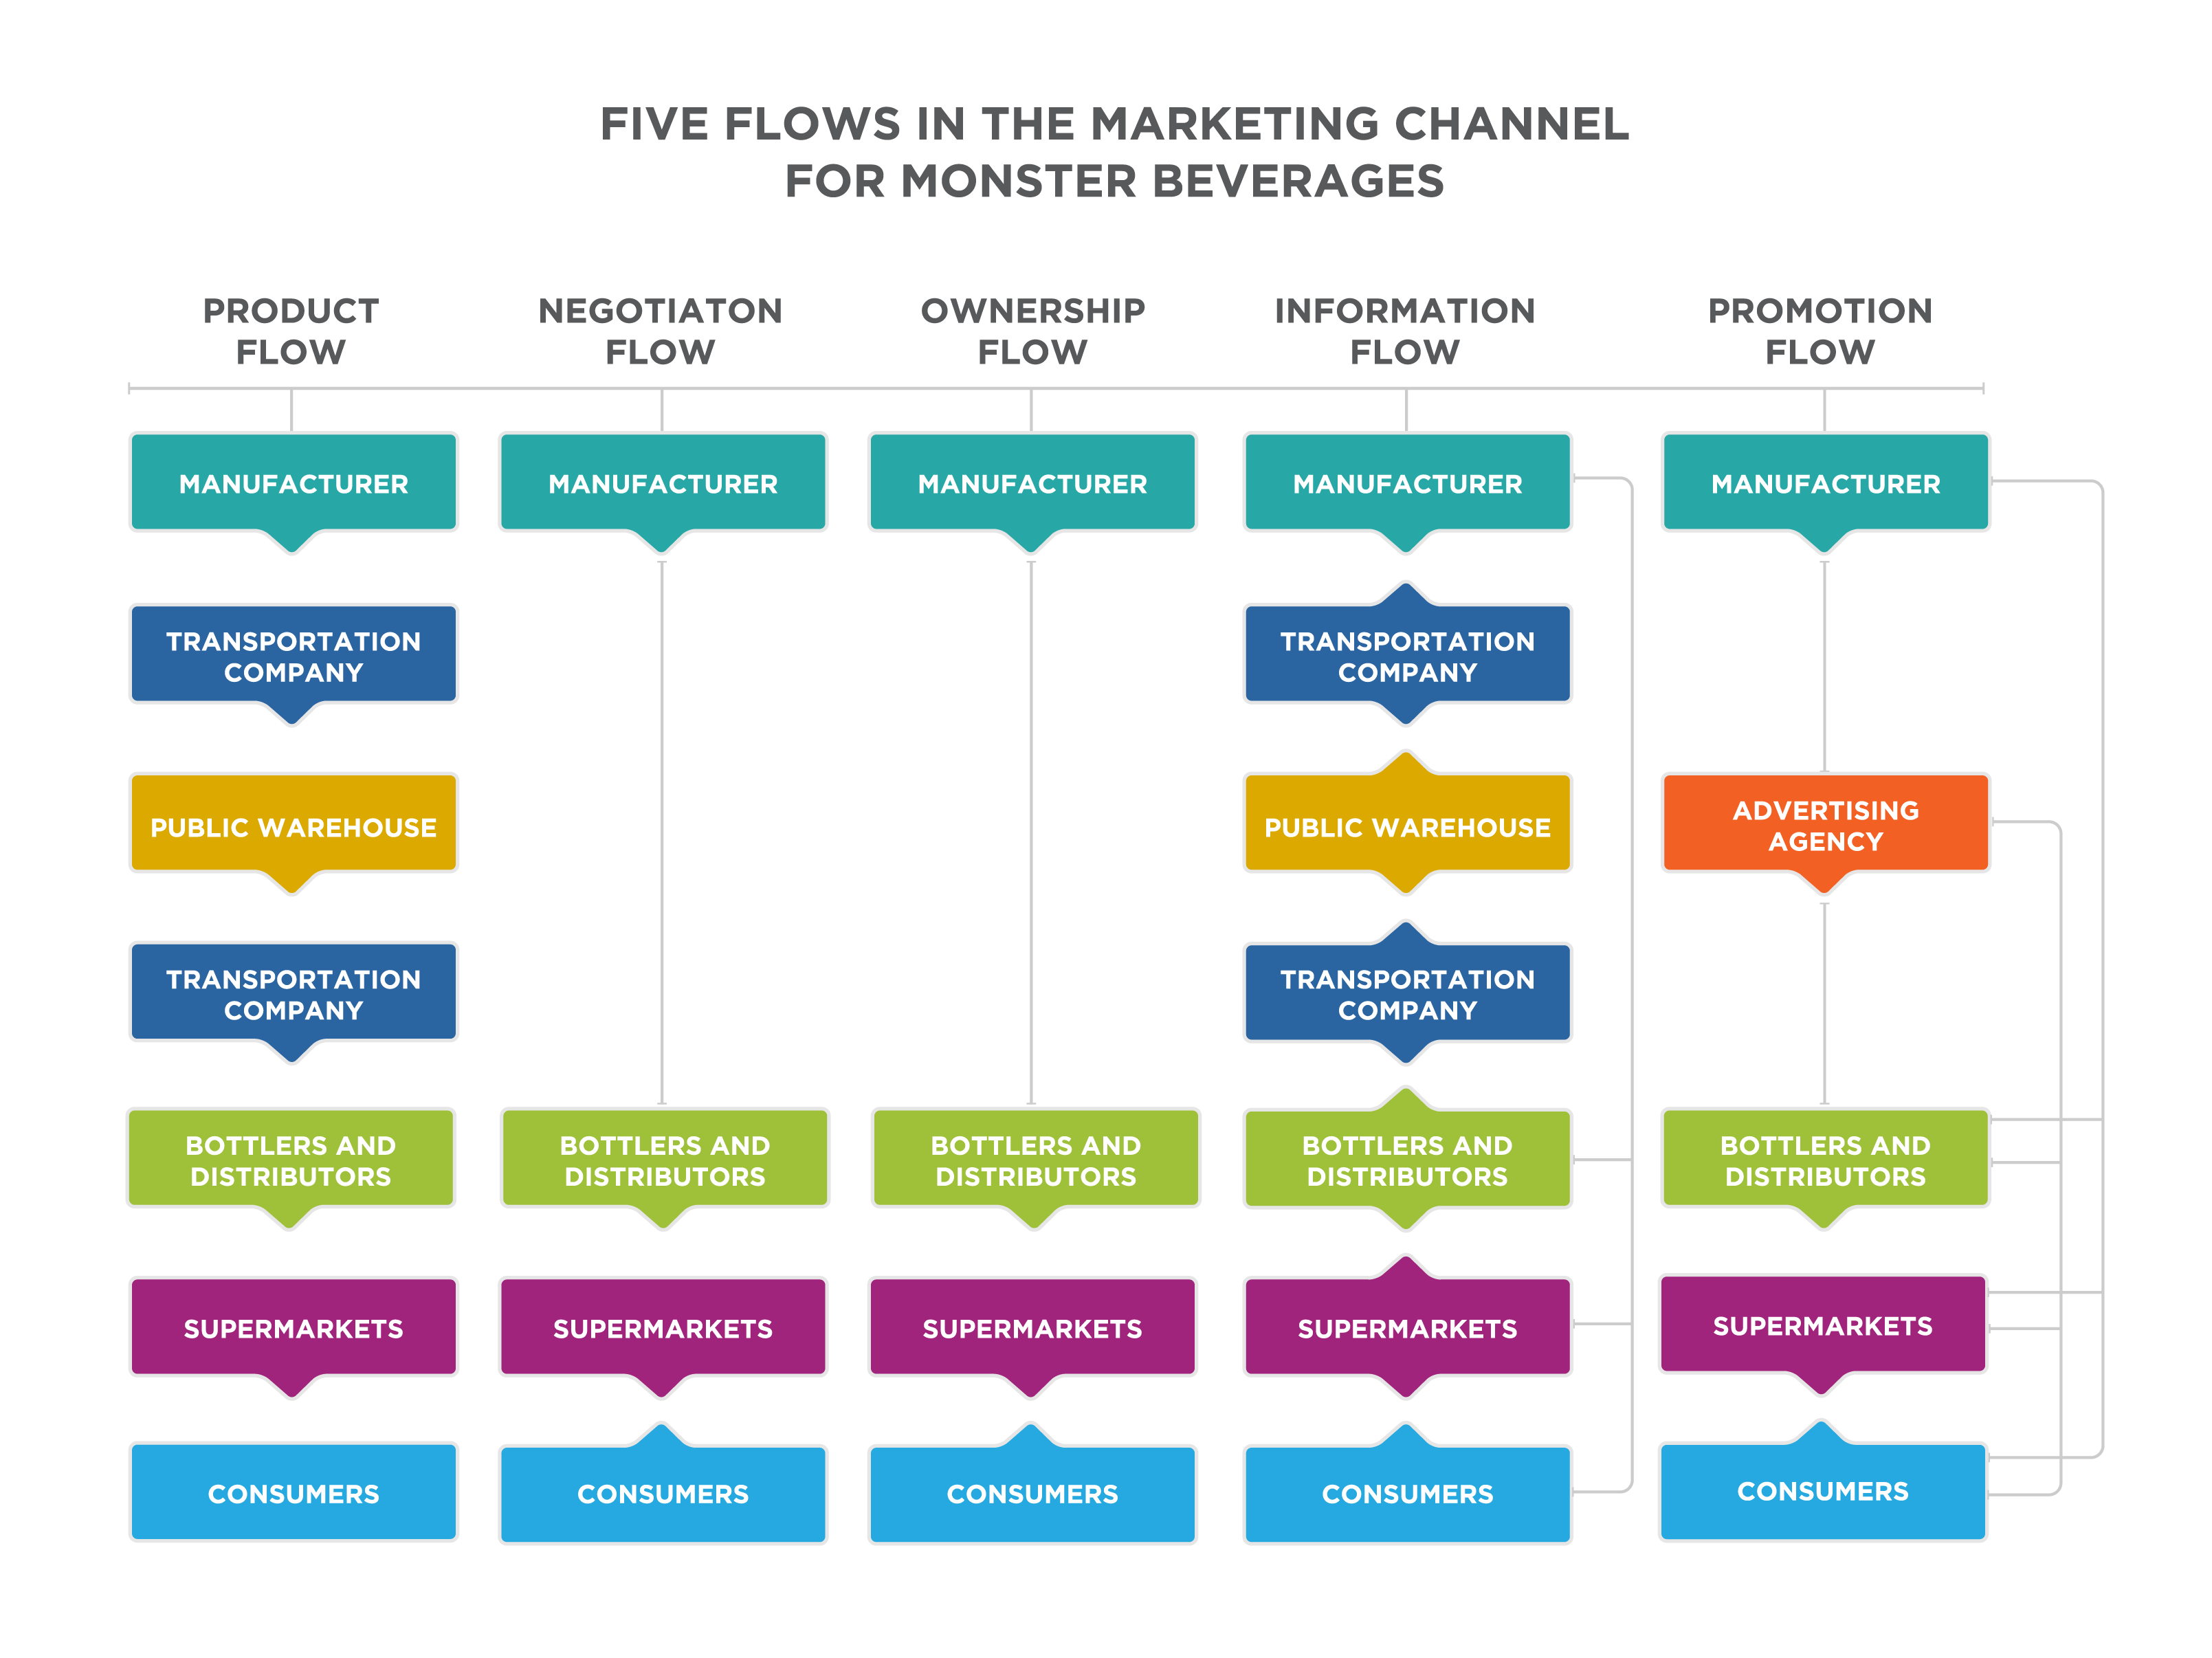 Five Flows in the Marketing Channel for Monster Beverages. Product Flow: Manufacturer flows to transportation company flows to public warehouse flows to transportation company flows to bottlers and distributors flows to supermarkets flows to consumers. Negotiation flow. Manufacturer flows to bottlers and distributers flows to supermarkets flows to consumers, and consumers flow to supermarkets. Ownership flow: Manufacturer flows to bottlers and distributers flows to supermarkets flows to consumers, and consumers flow to supermarkets. Information flow. Manufacturers flow to transportation company, to bottlers and distributors, to supermarkets, and to consumers. Transportation company flows back to manufacturer and to public warehouse. Public warehouses flows to first transportation company and second transportation company. Second transportation company flows to public warehouse and to bottlers and distributors. Bottlers and distributers flow to transportation company and to supermarkets. Supermarkets flow to bottlers and distributors and to consumers. Consumers flow to supermarkets. Promotion flow: Manufacturer flows to advertising agency, to bottlers and distributors, to supermarkets, and to consumers. Advertising agency flows to bottlers and distributors, to supermarkets, and to consumers. Bottlers and distributors flow to supermarkets and to consumers. Supermarkets flow to consumers. Consumers flow to supermarkets.